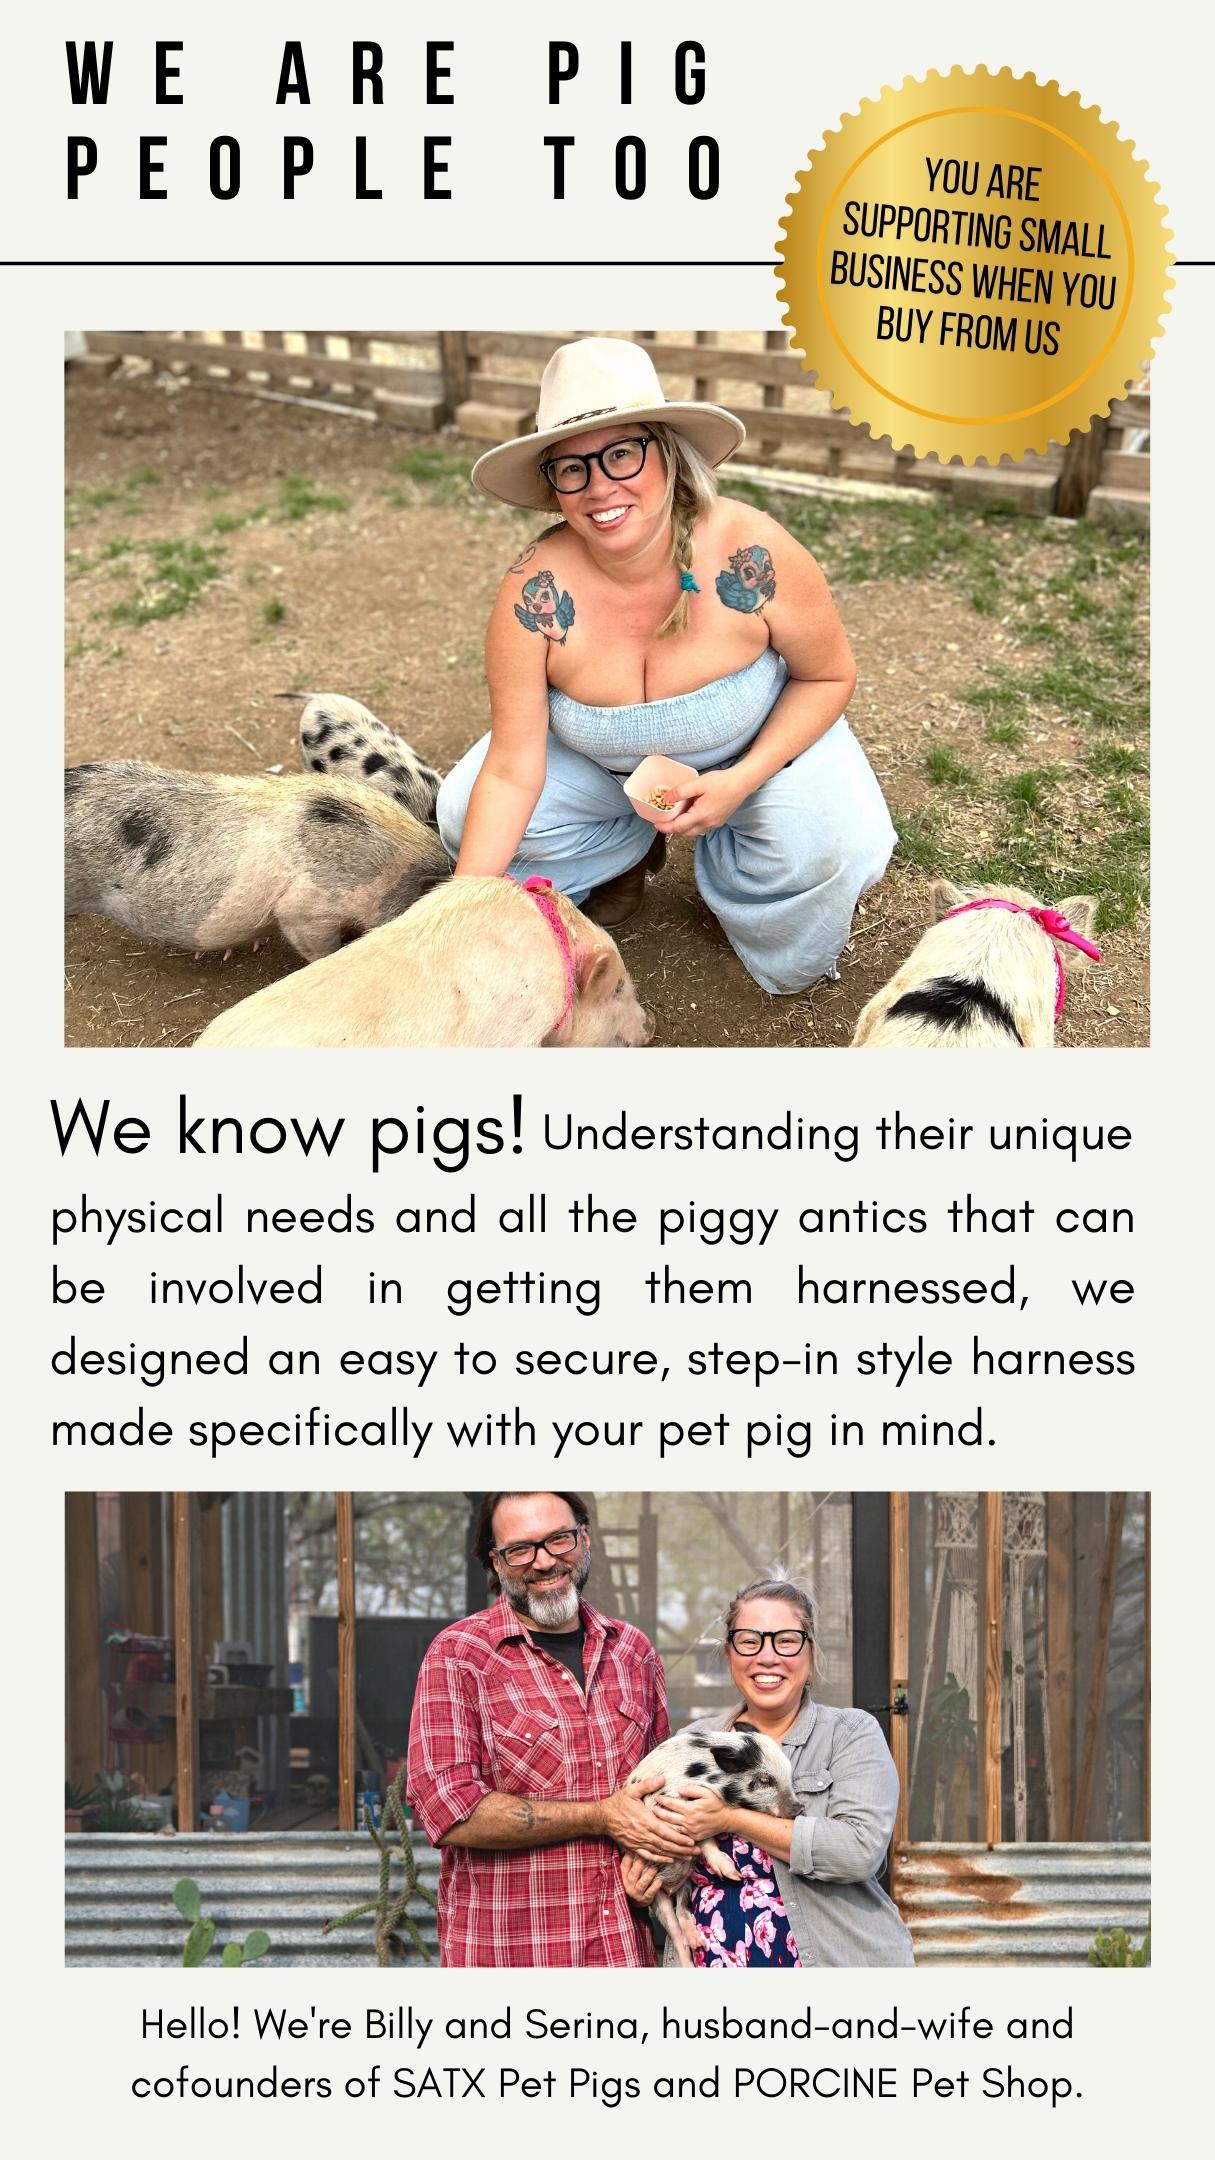 Husband and wife cofounders owners of SATX Pet Pigs | PORCINE Pet Shop